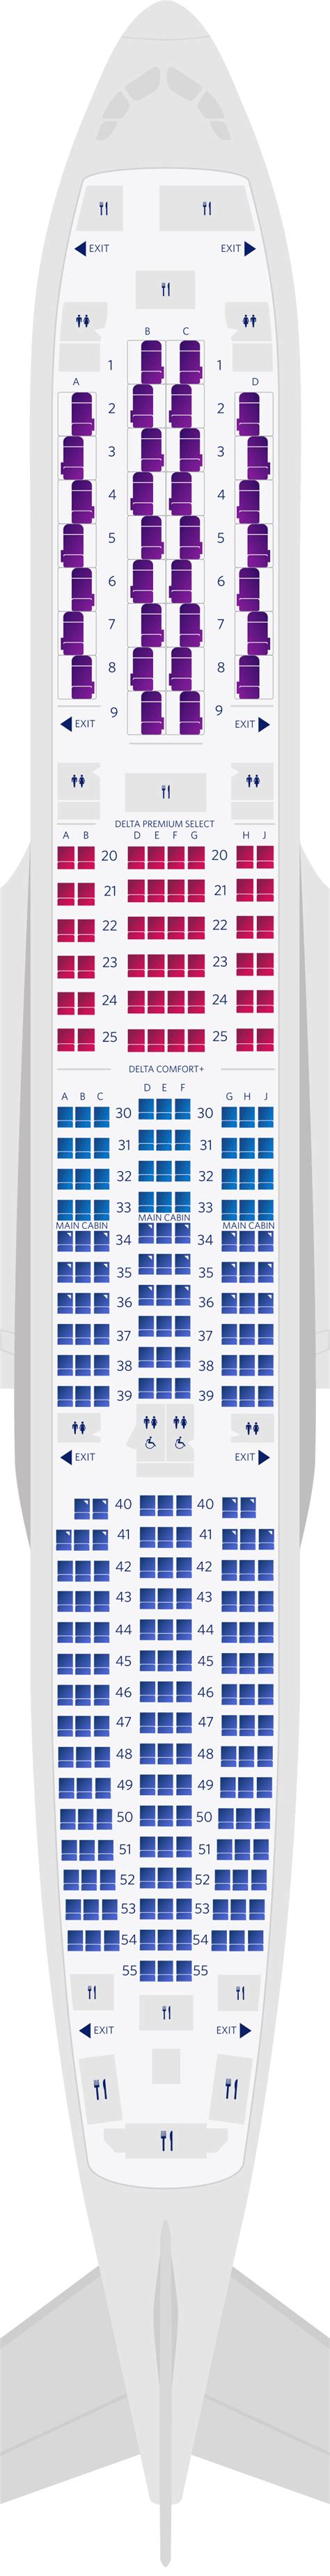 Delta Airbus A380 800 Seating Chart Elcho Table